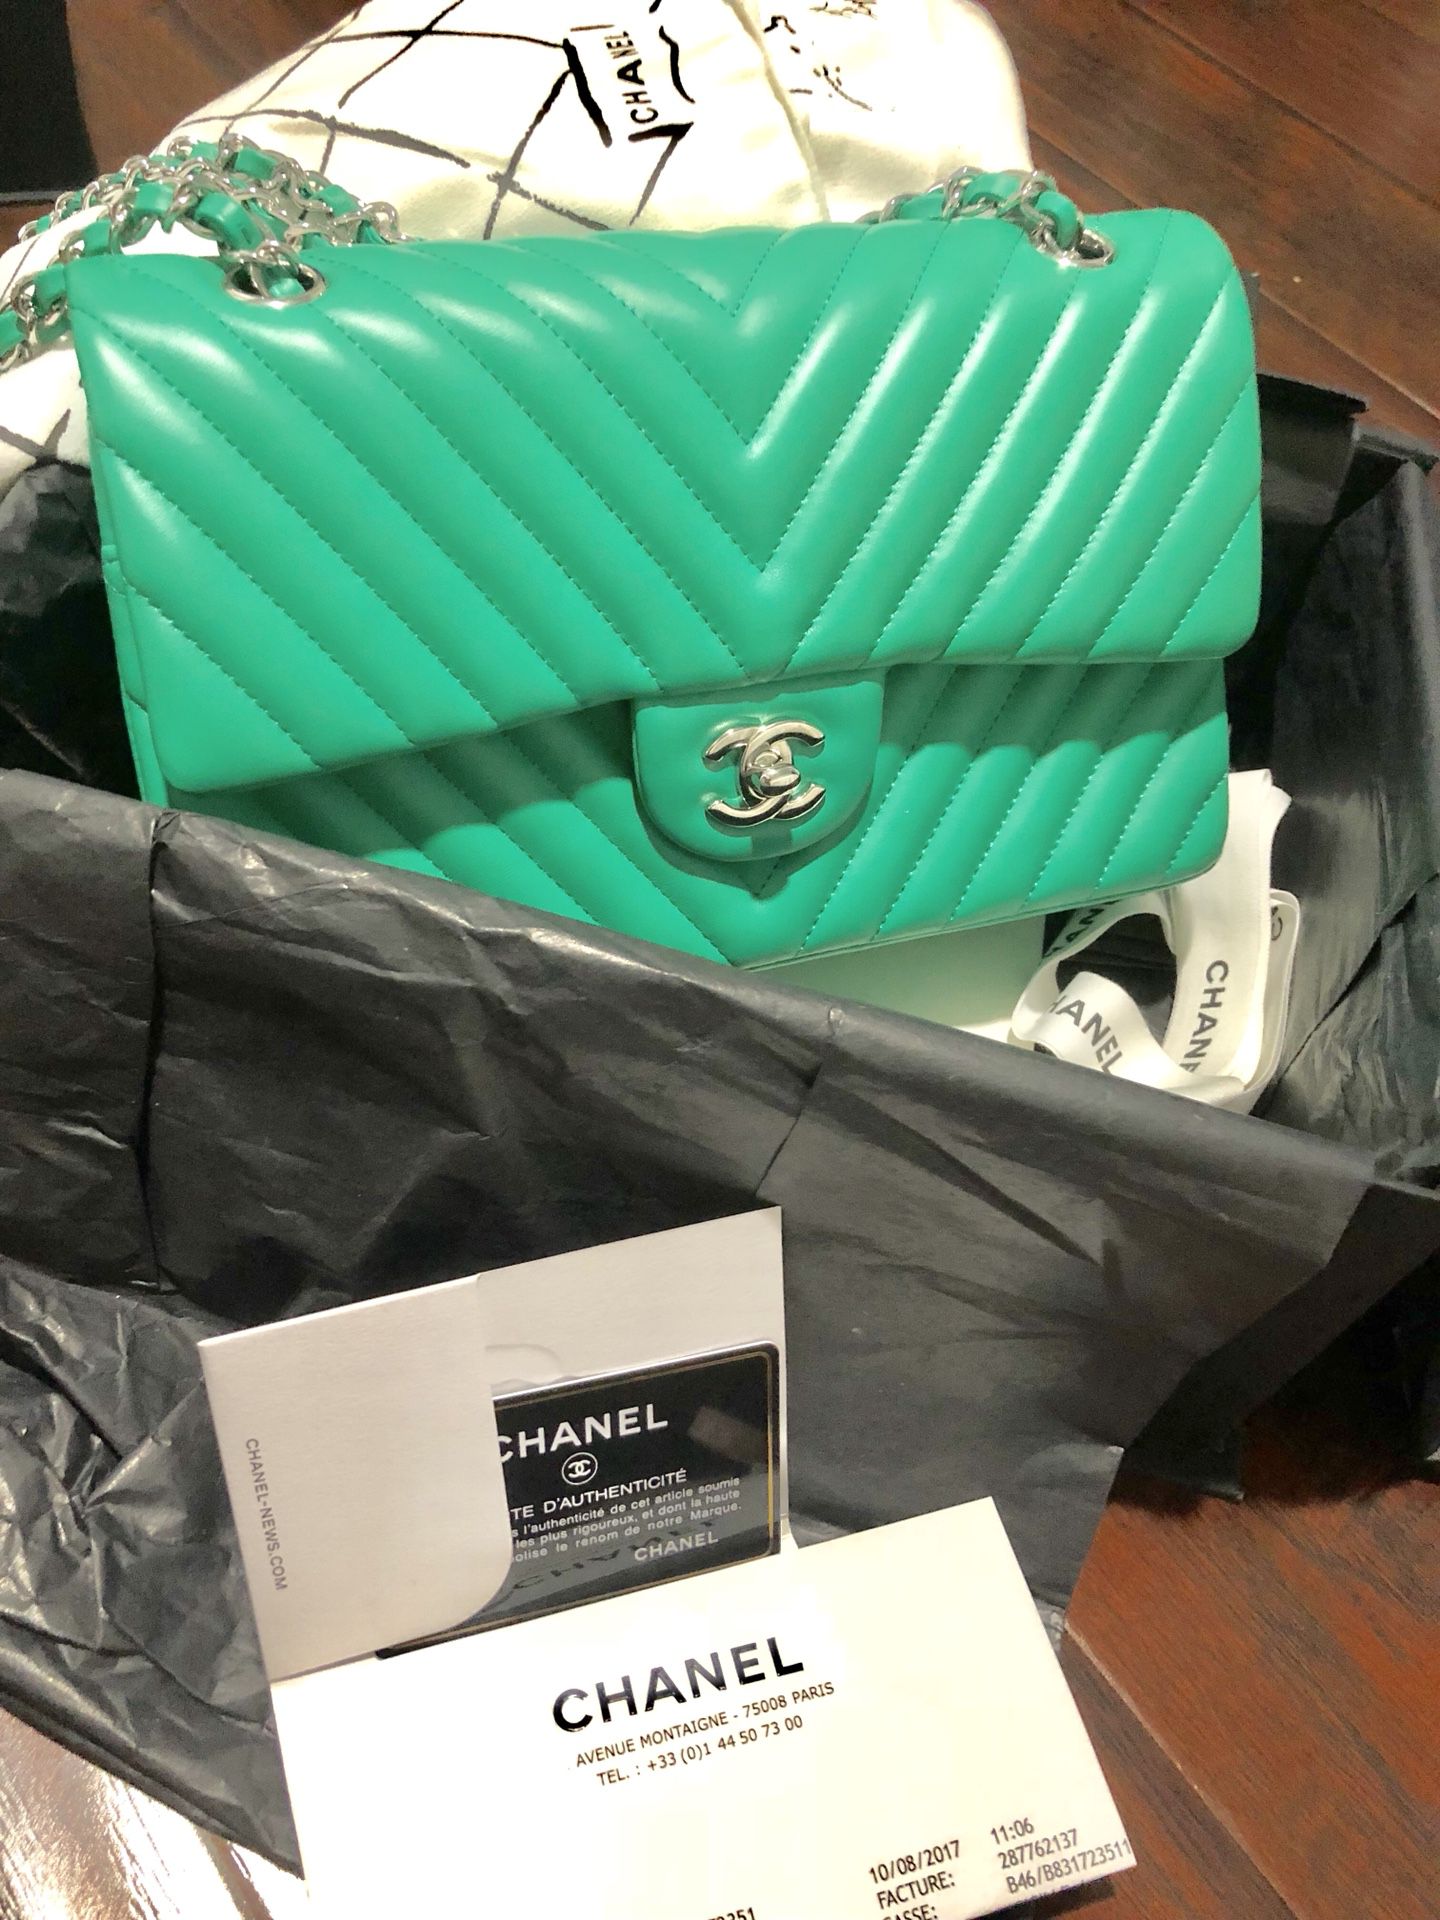 Chanel classic medium teal green bag purse for Sale in Milpitas, CA -  OfferUp